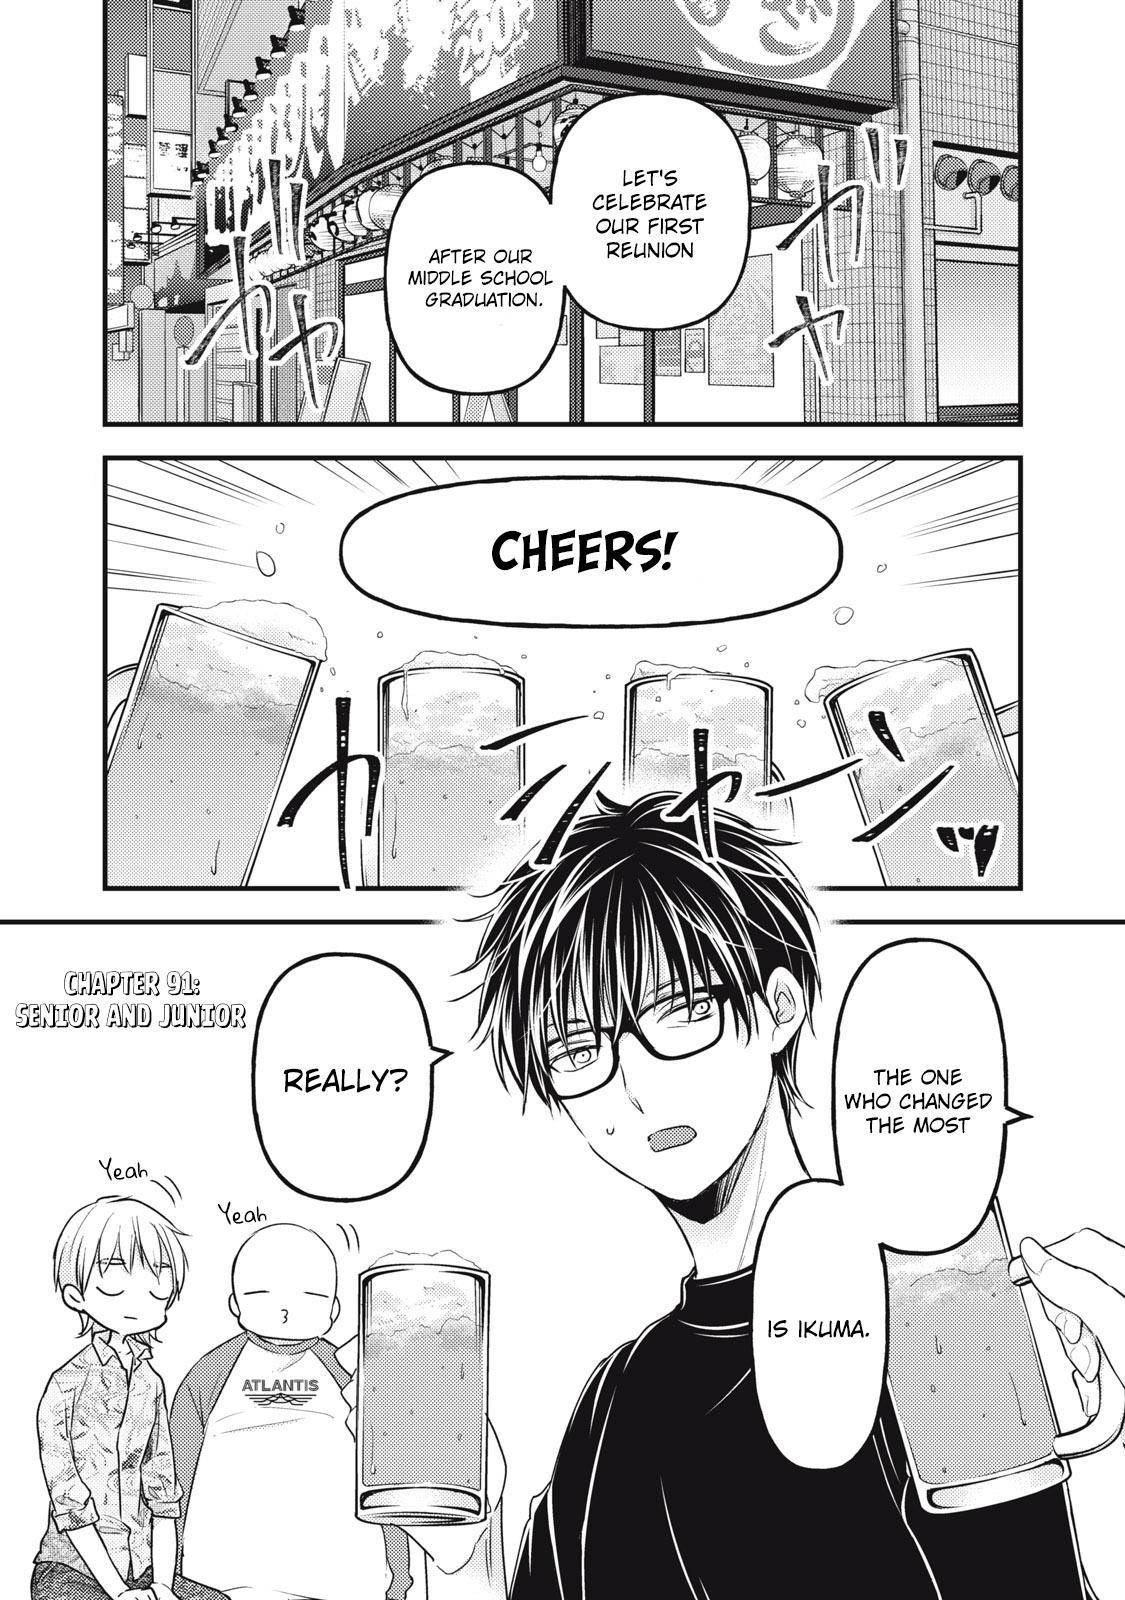 We May Be An Inexperienced Couple But... - chapter 91 - #2